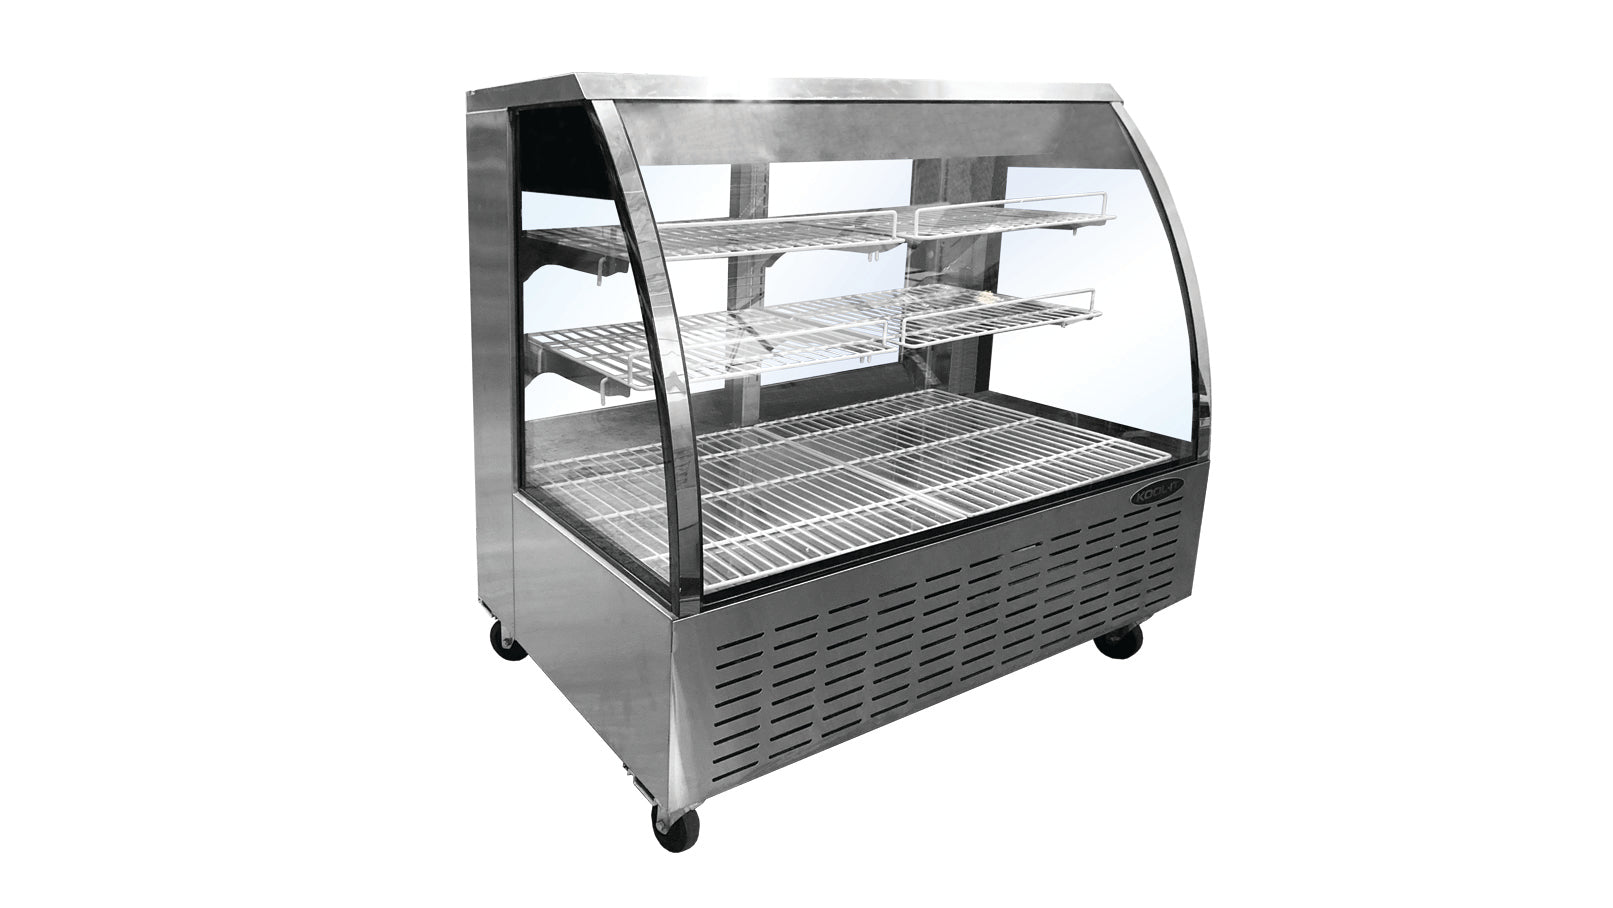 Kool-It - KDG-72, 72" Curved Glass Deli Cases With 26.4 cu.ft Capacity